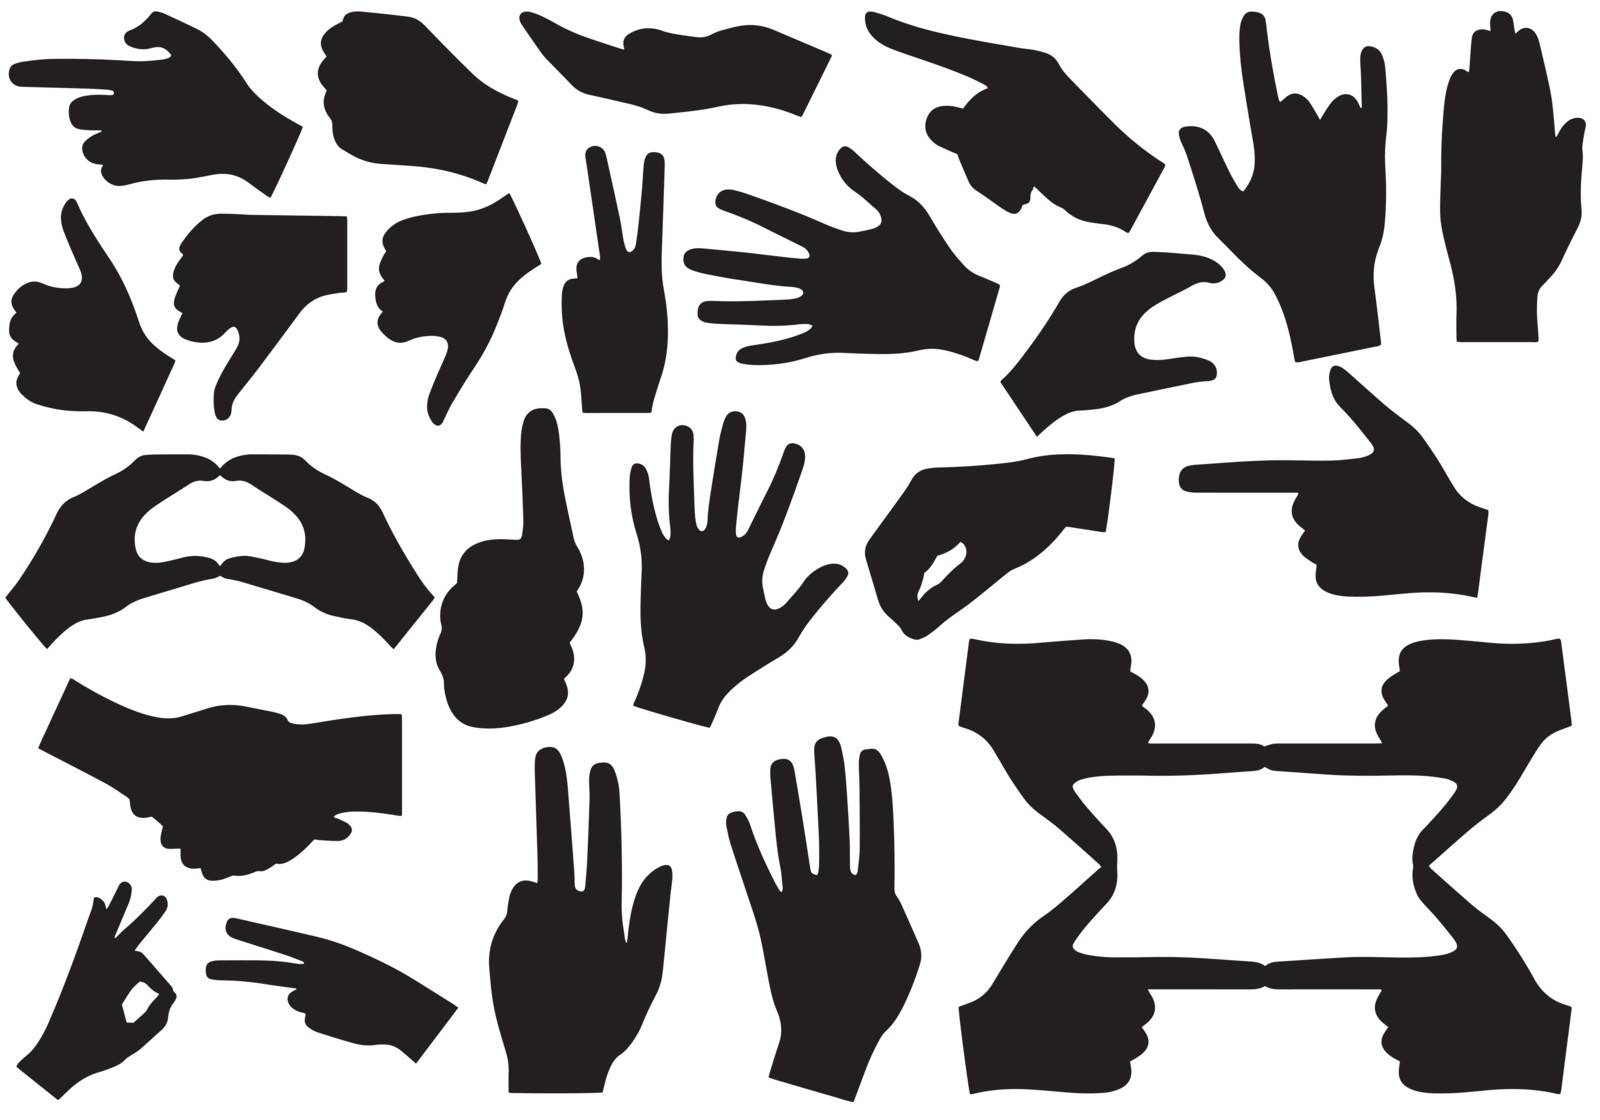 Illustration of gesticulation hands on white background